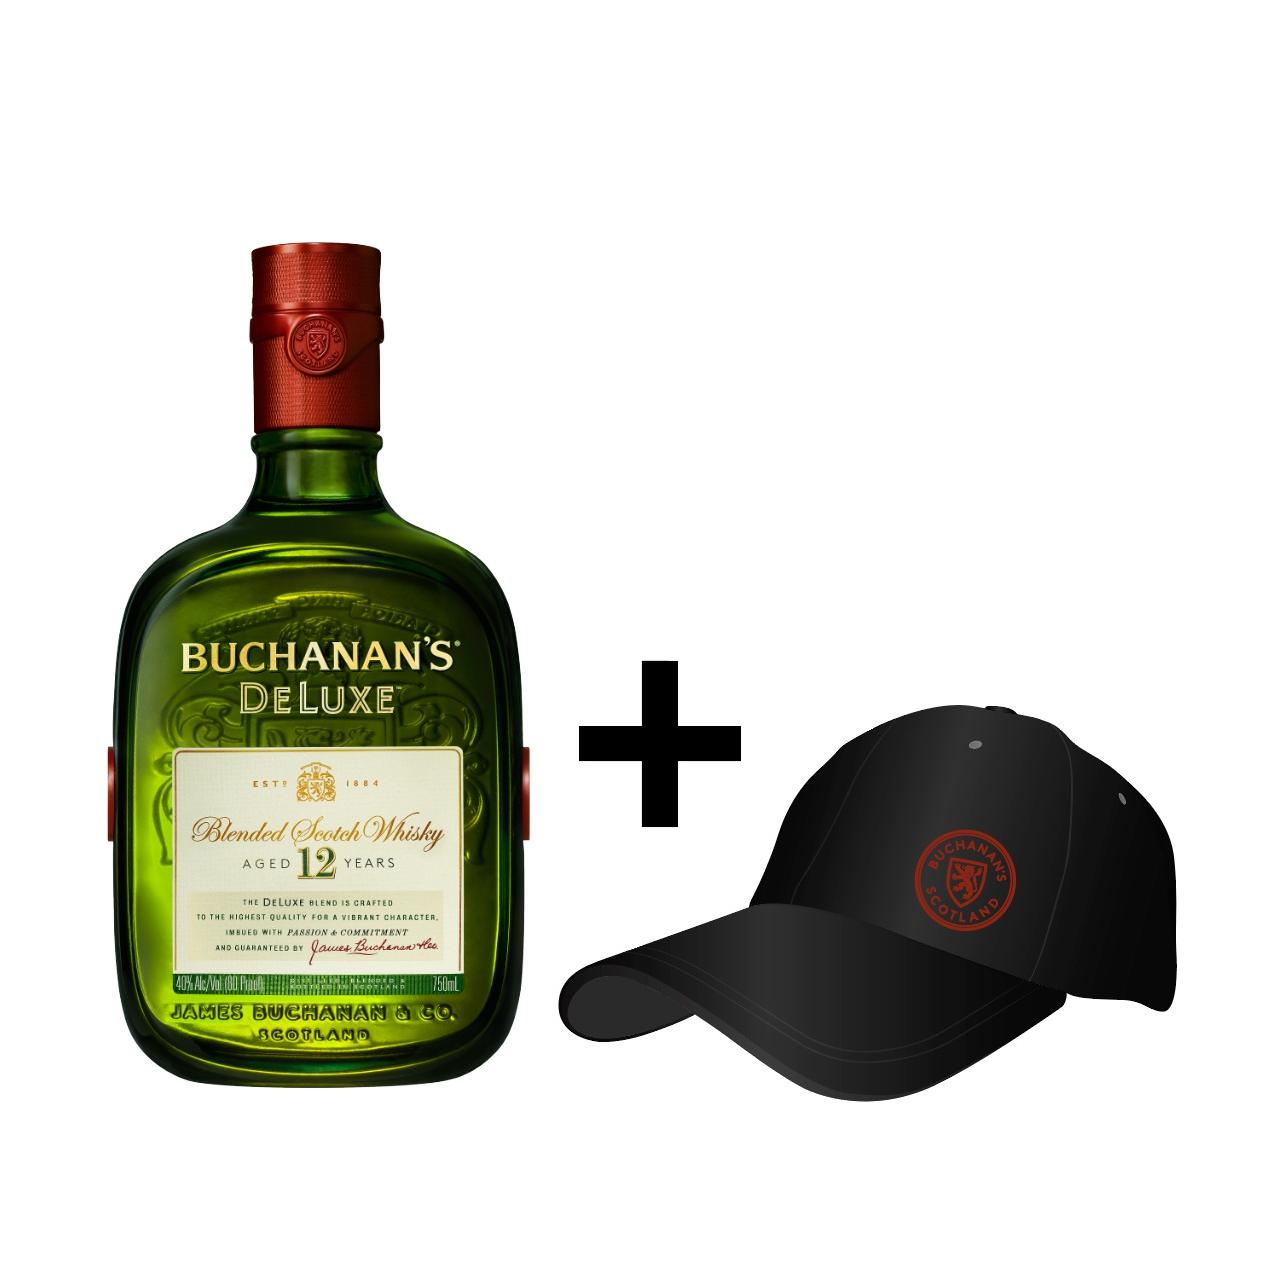 COMBO WHISKY BUCHANAN'S DeLuxe Aged 12 Anos 1l - 6 unidades